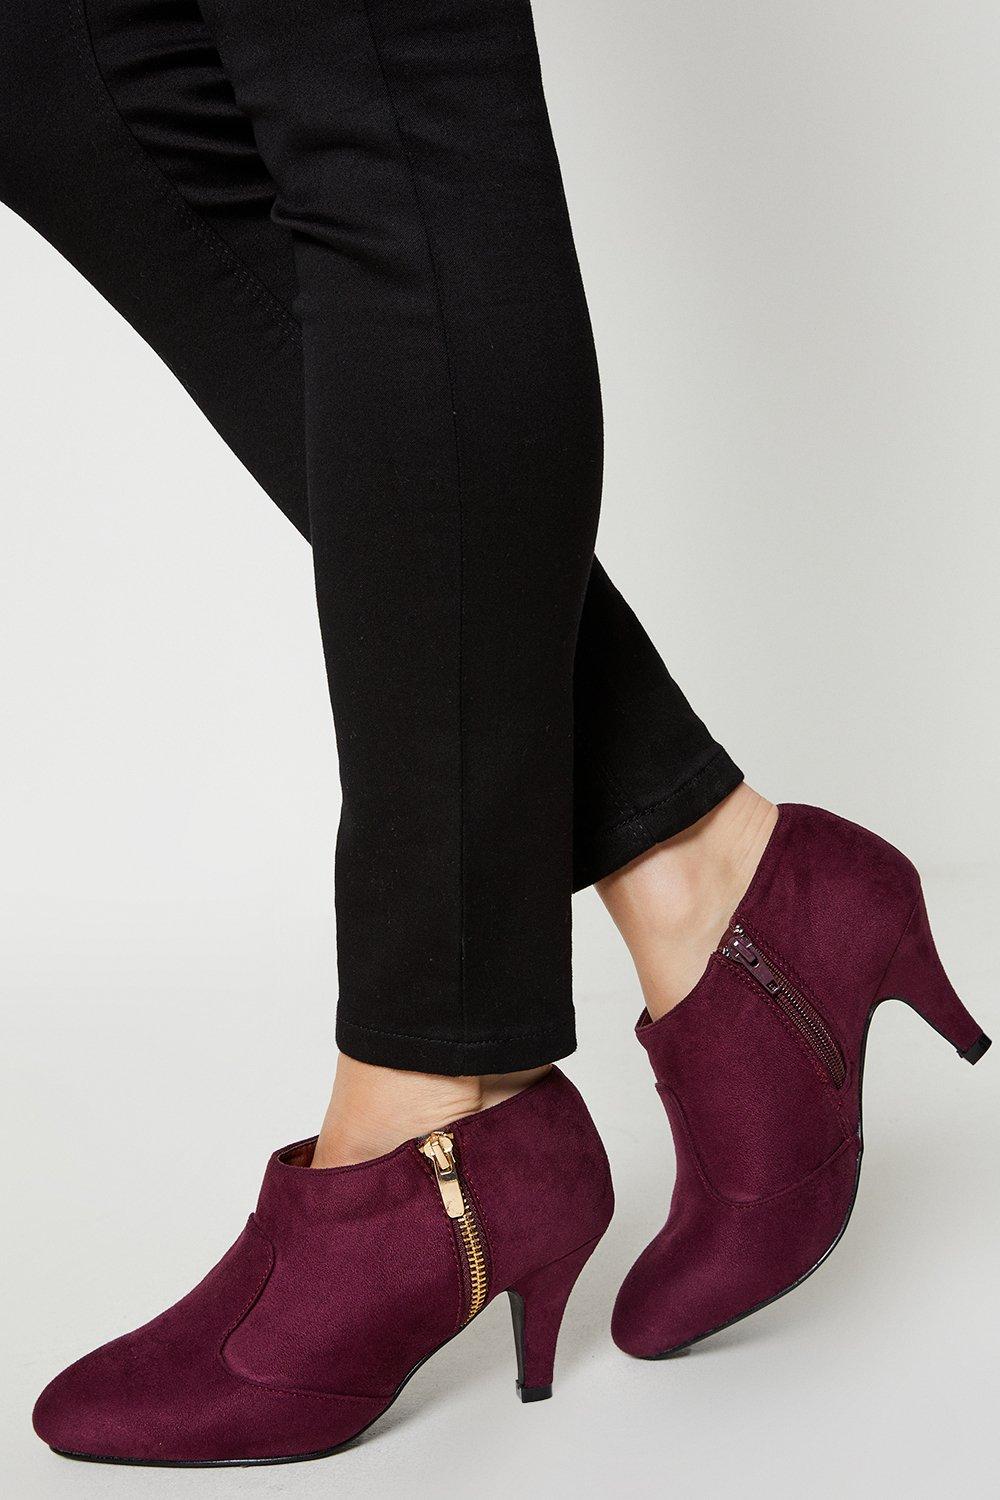 Women’s Good For The Sole: Wide Fit Marley Comfort Zip Heeled Ankle Boots - burgundy - 3